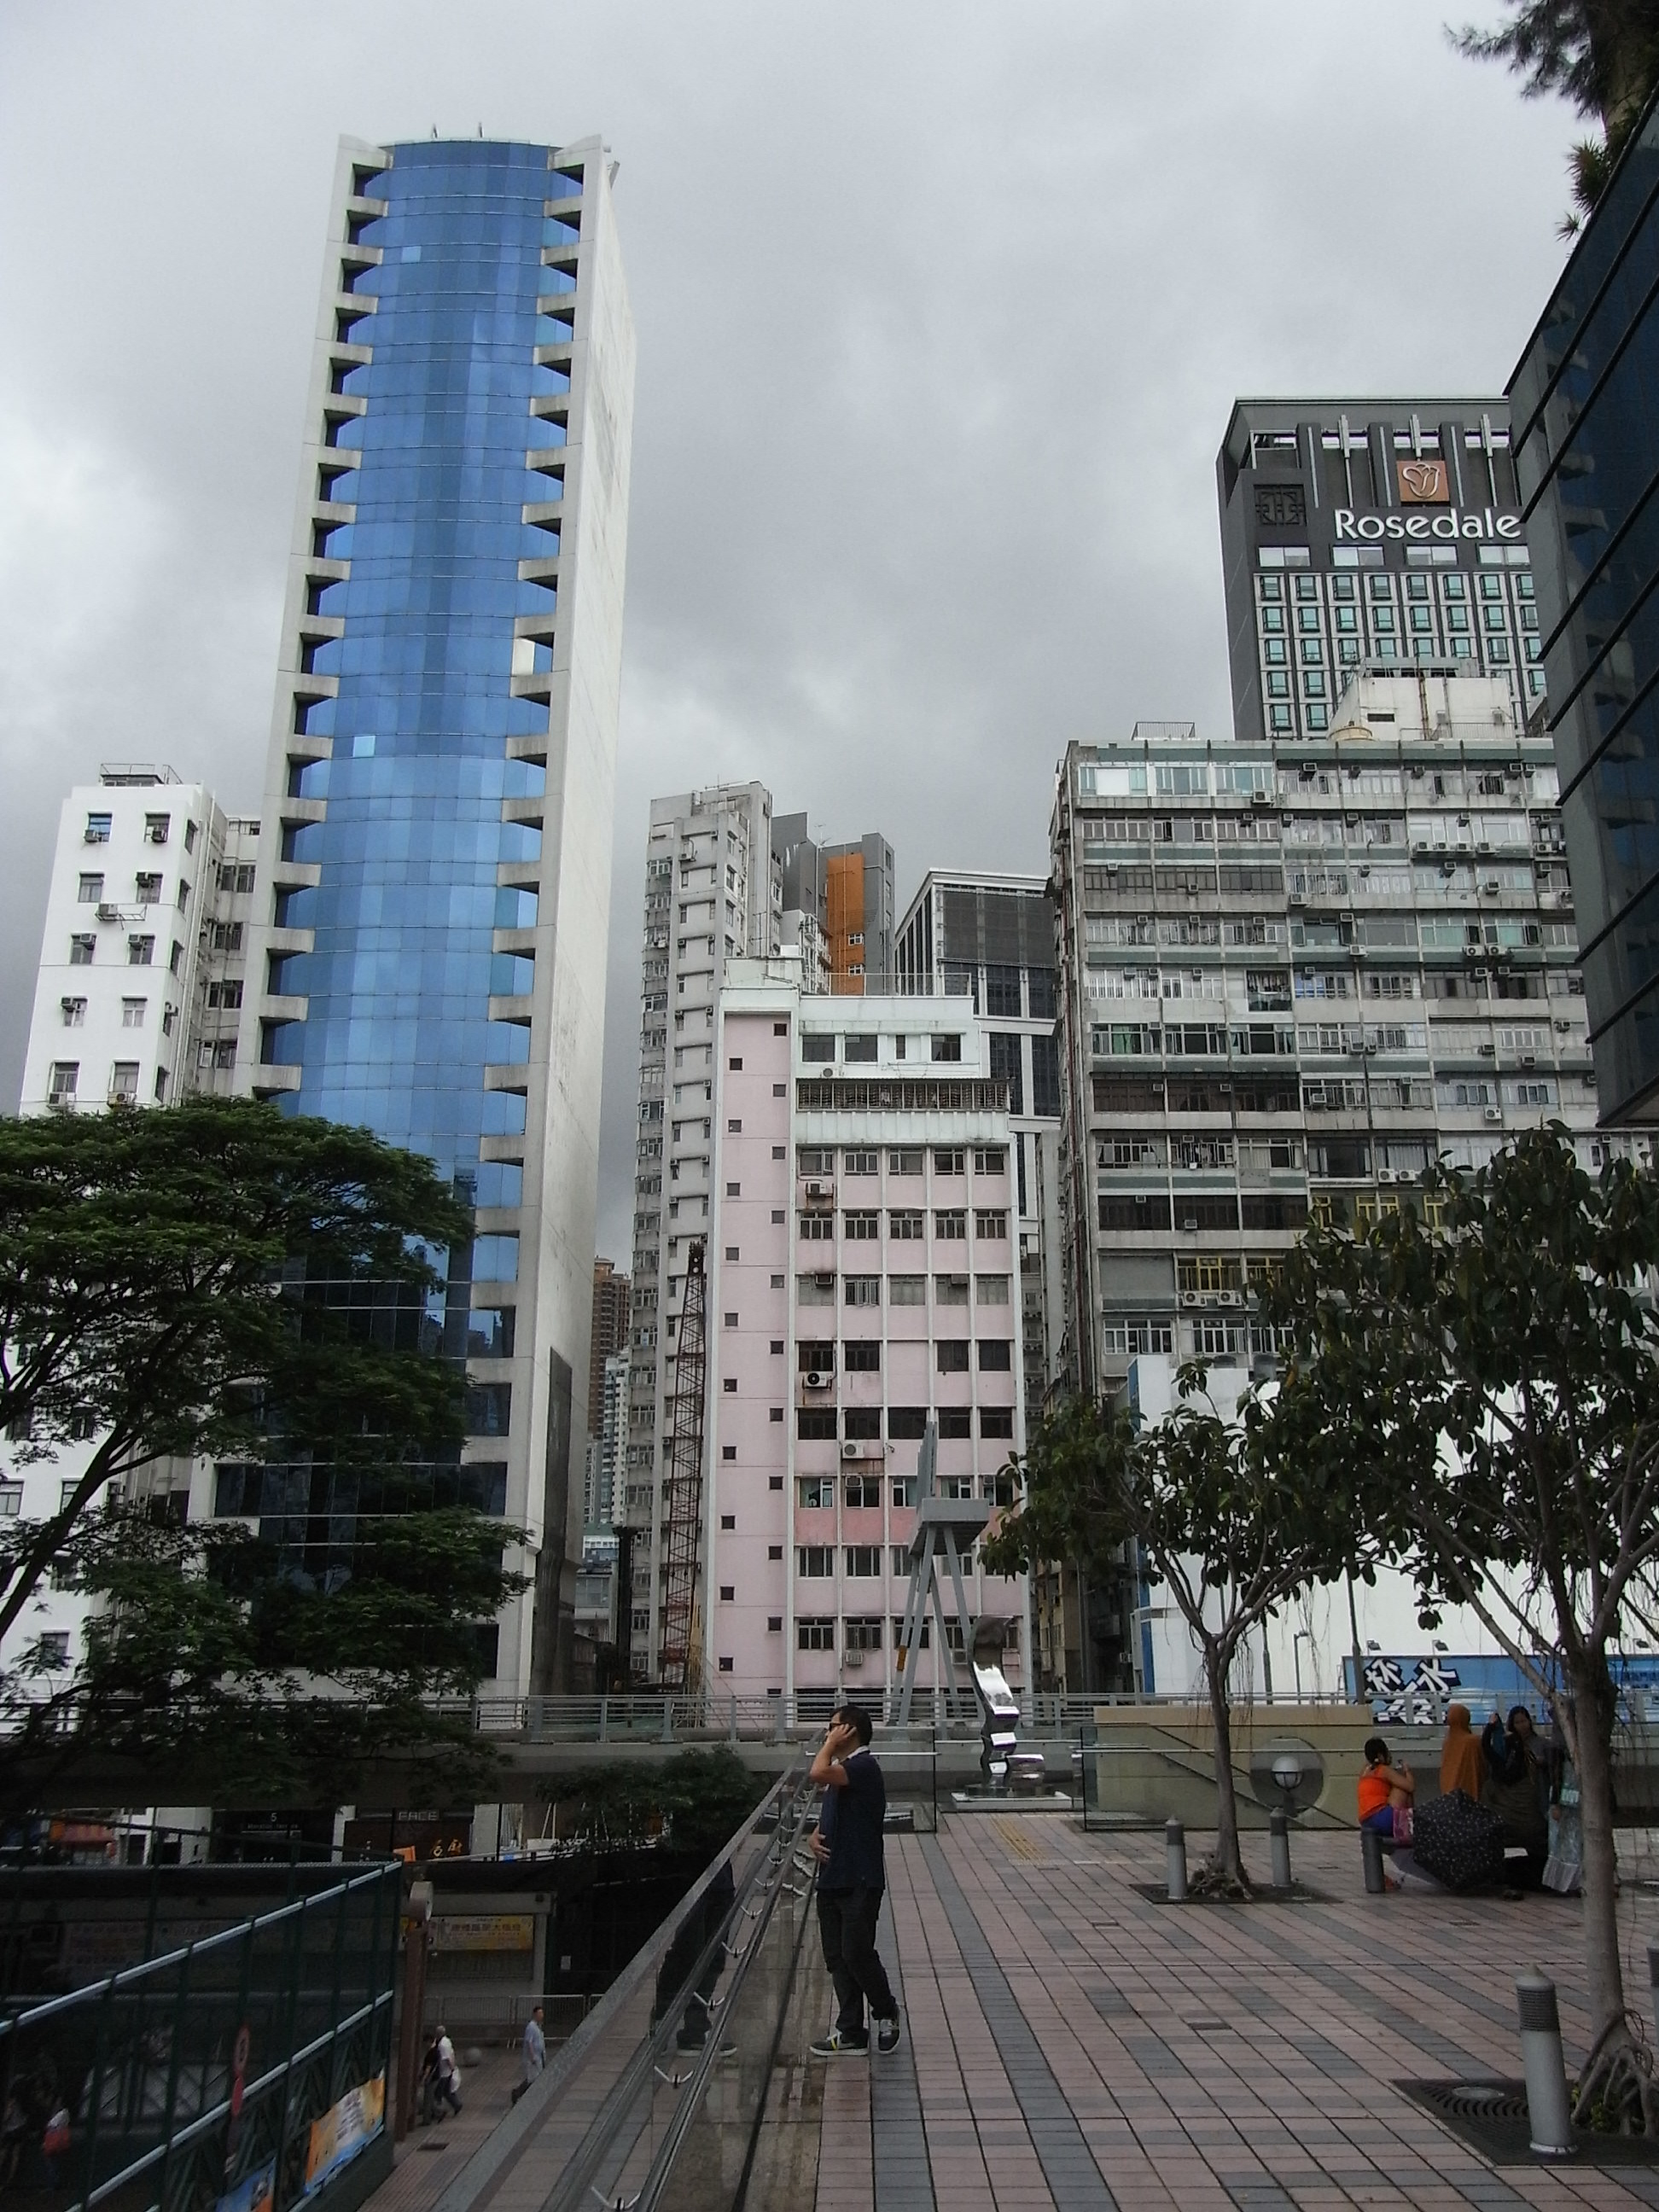 File Hk Causeway Bay Hkcl Terrace View Sik King House N Park Avenue Tower Facades Aug 12 Jpg Wikimedia Commons